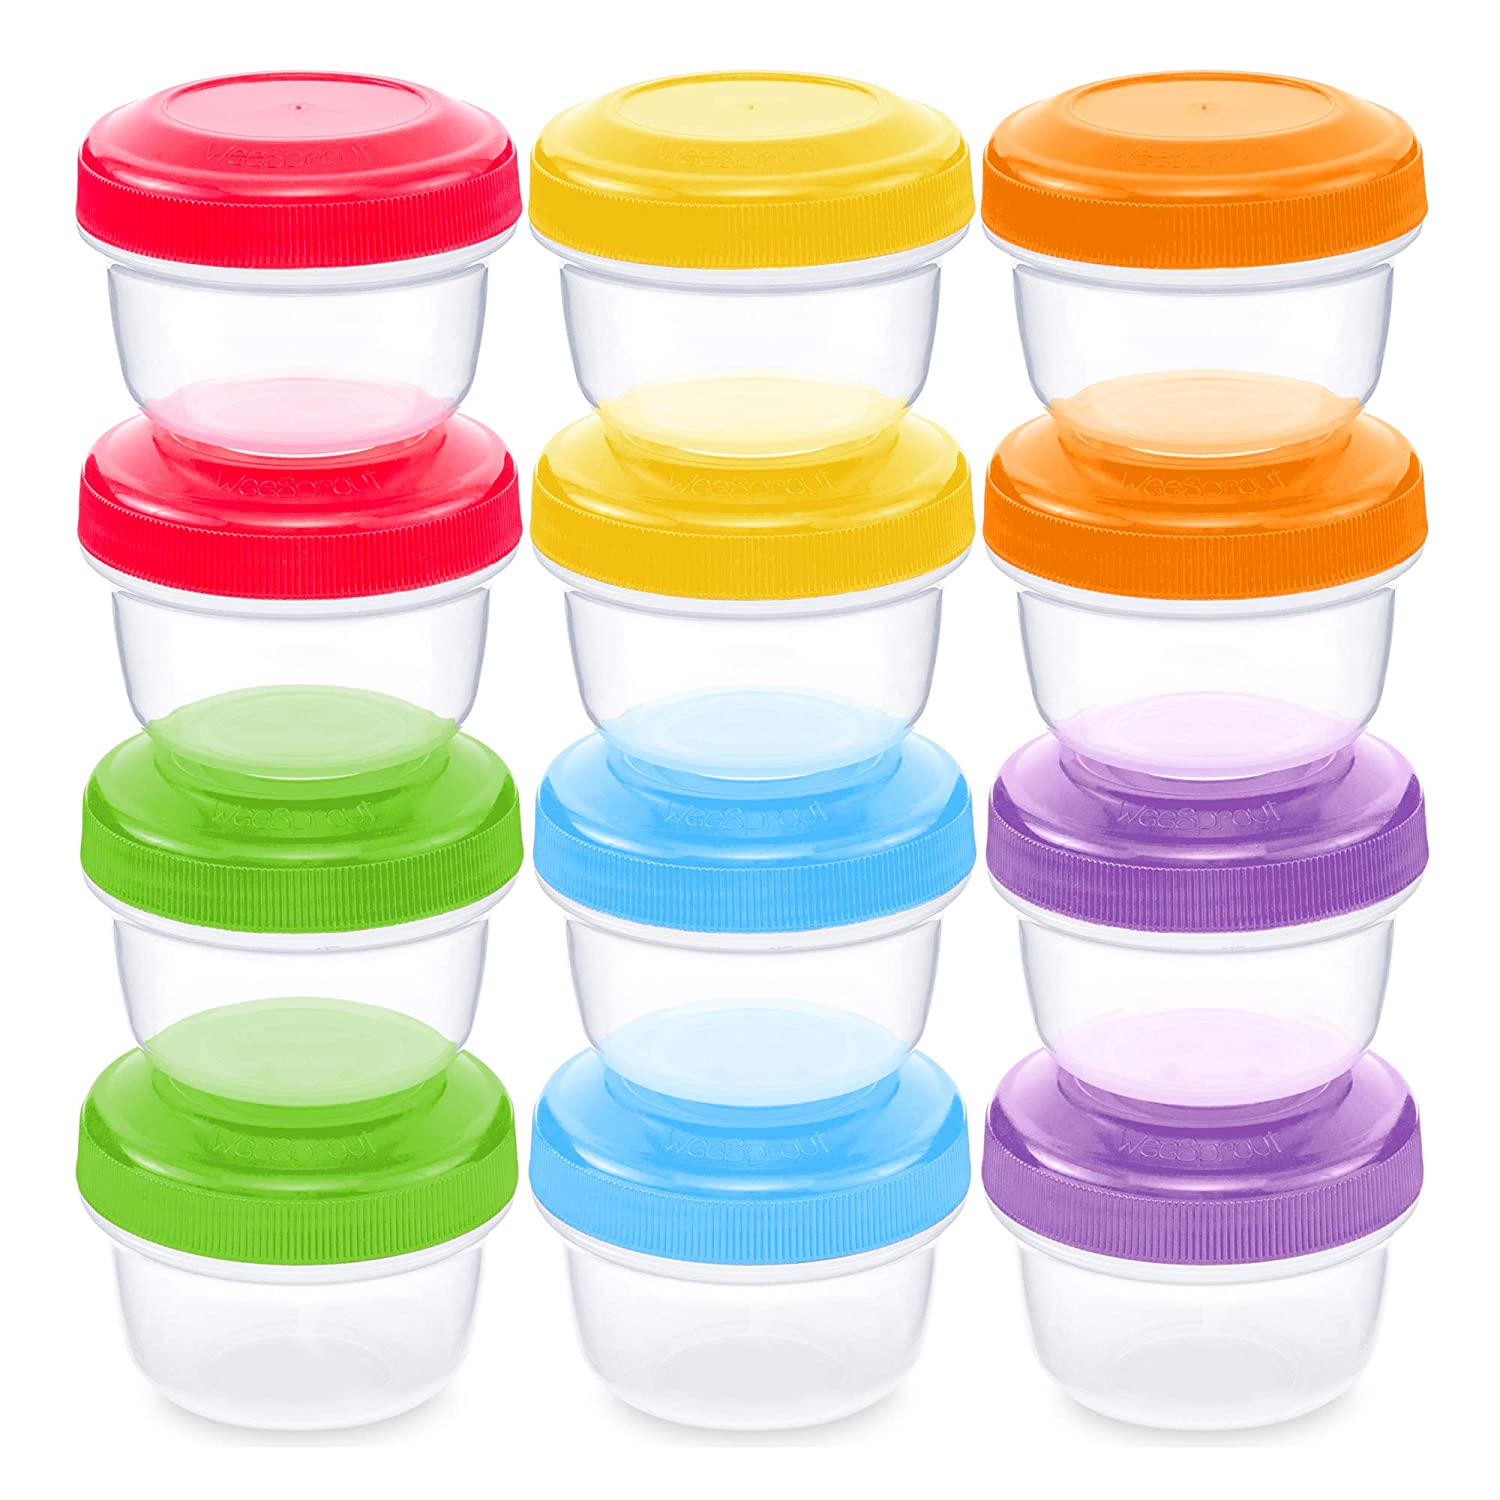 8x Mini Storage Boxes Plastic Baby Weaning Feeding Freezer Food Pots Containers 